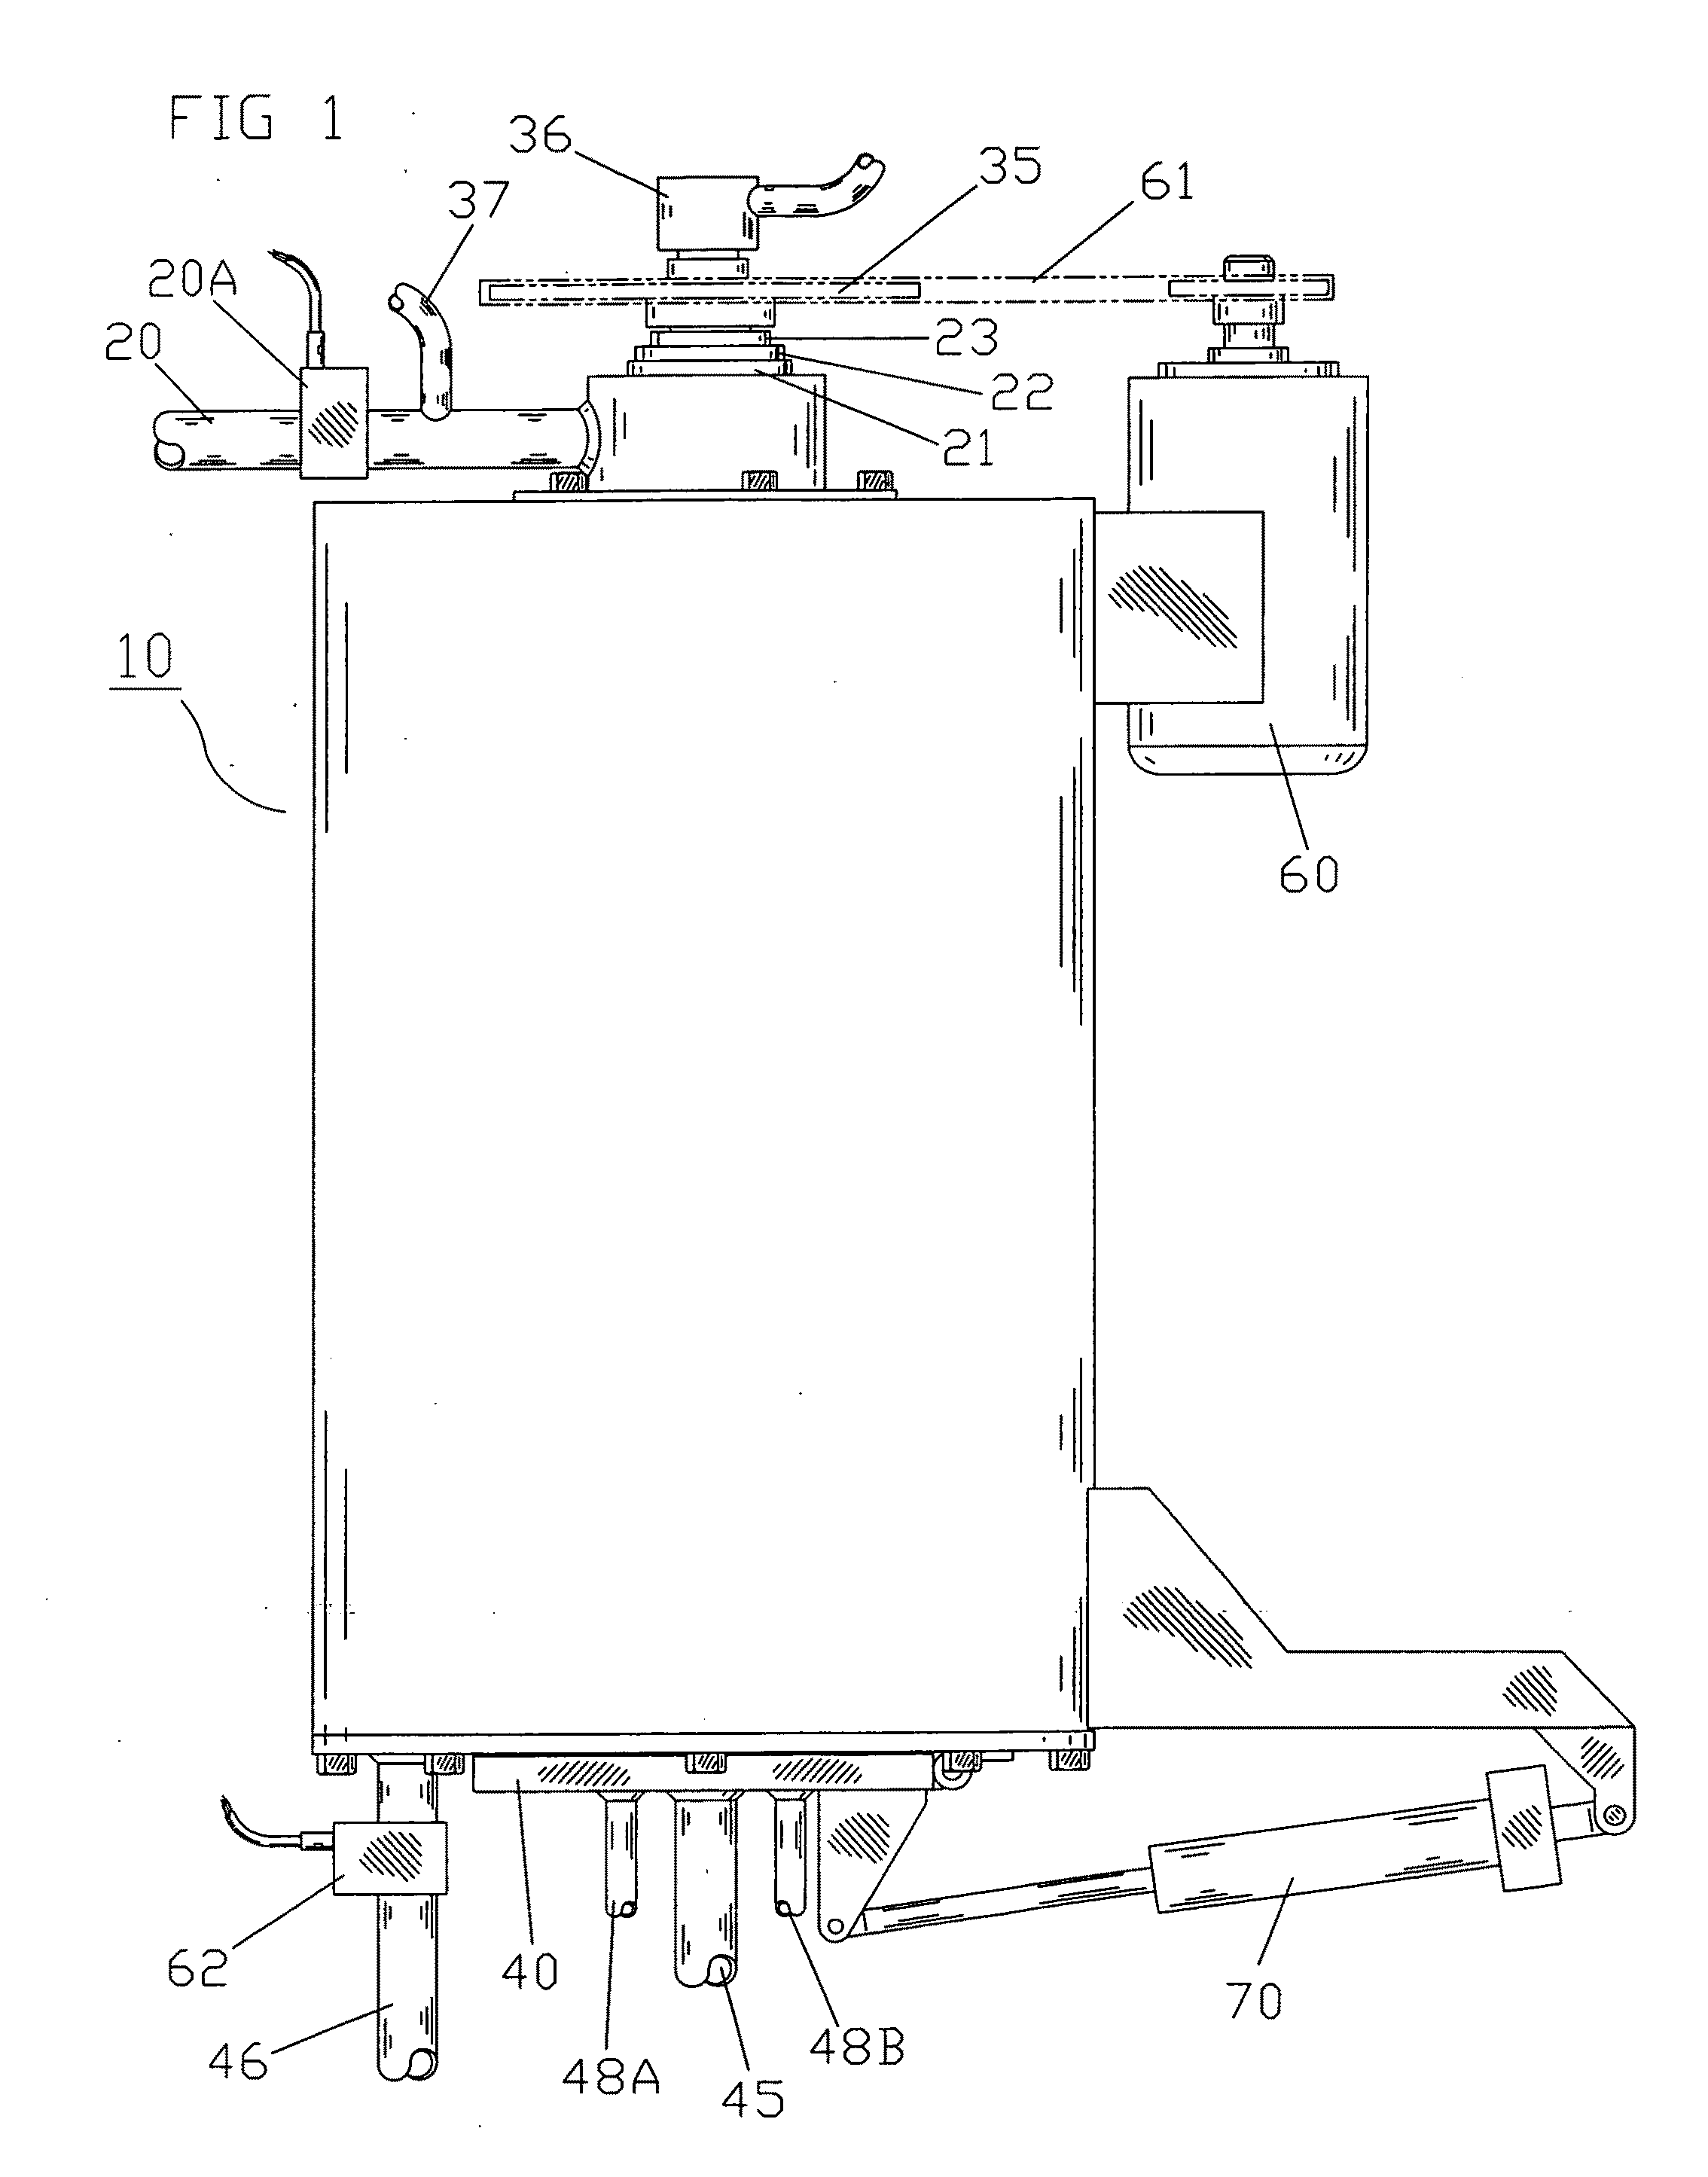 Method and apparatus for separating and dewatering slurries